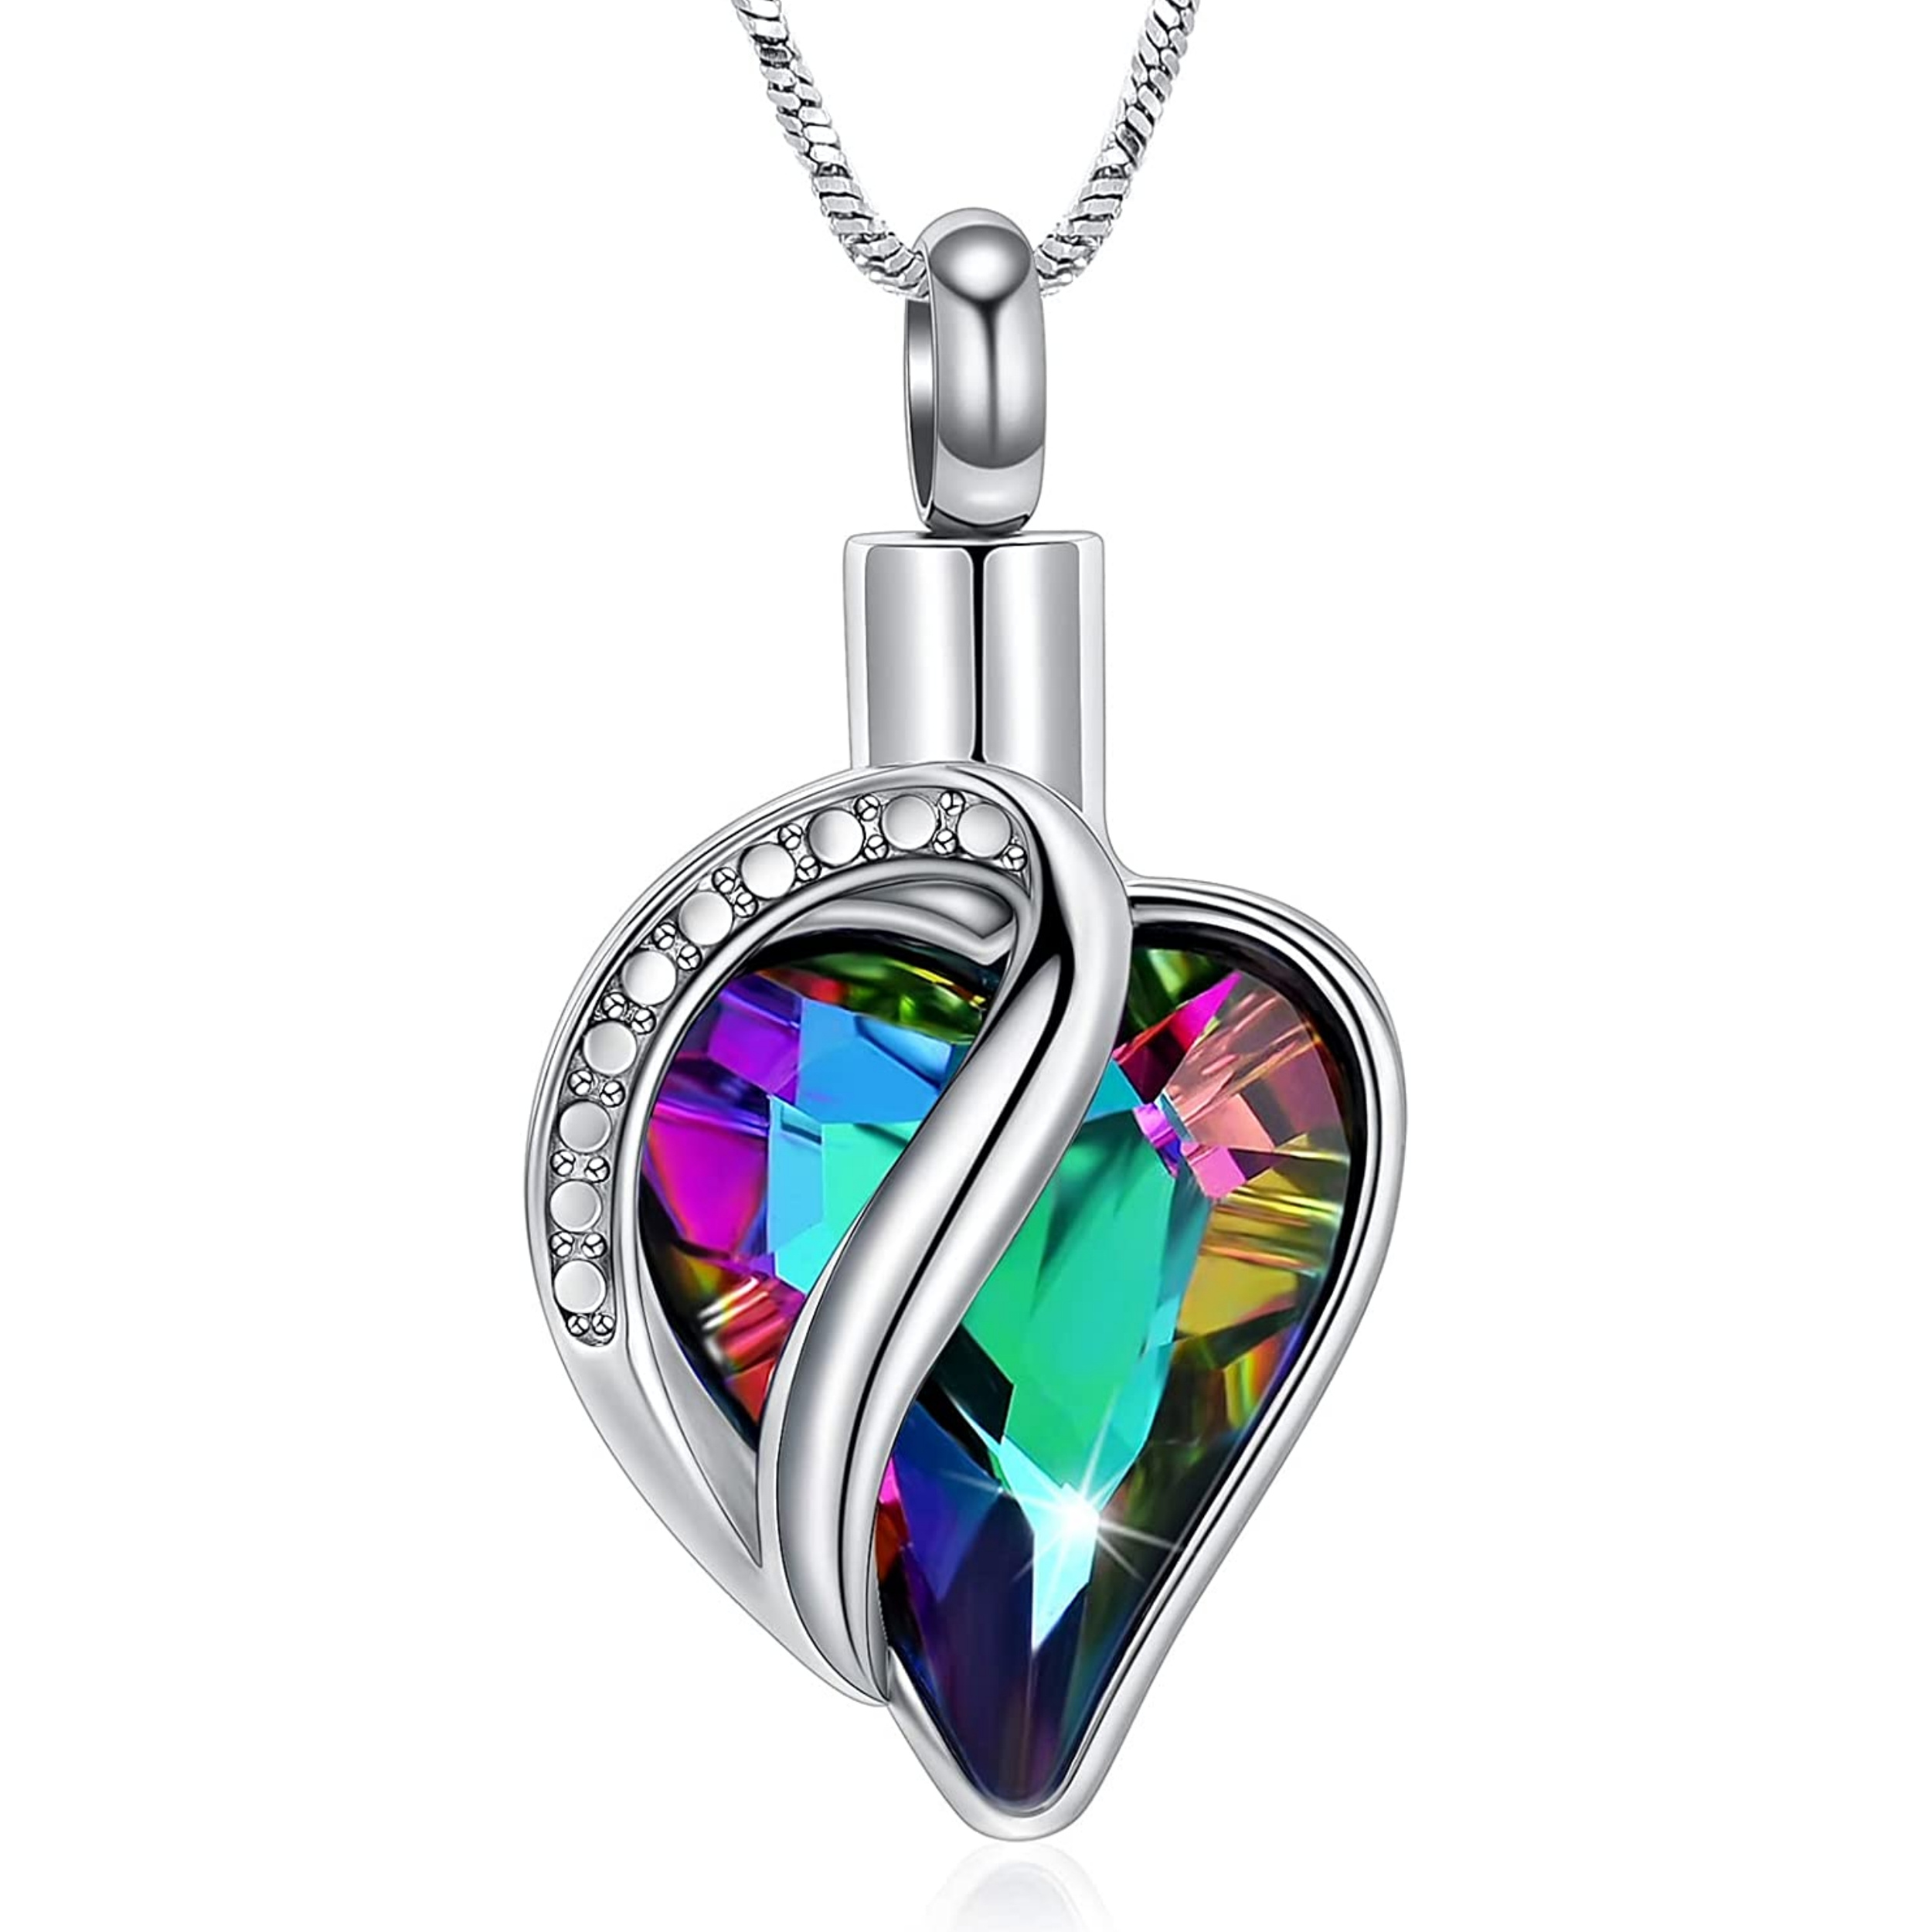 1pc infinity heart crystal love pendant necklace ashes hair storage keepsake necklace halloween gift ornament jewelry for men couples women sisters student memorial animal gifts